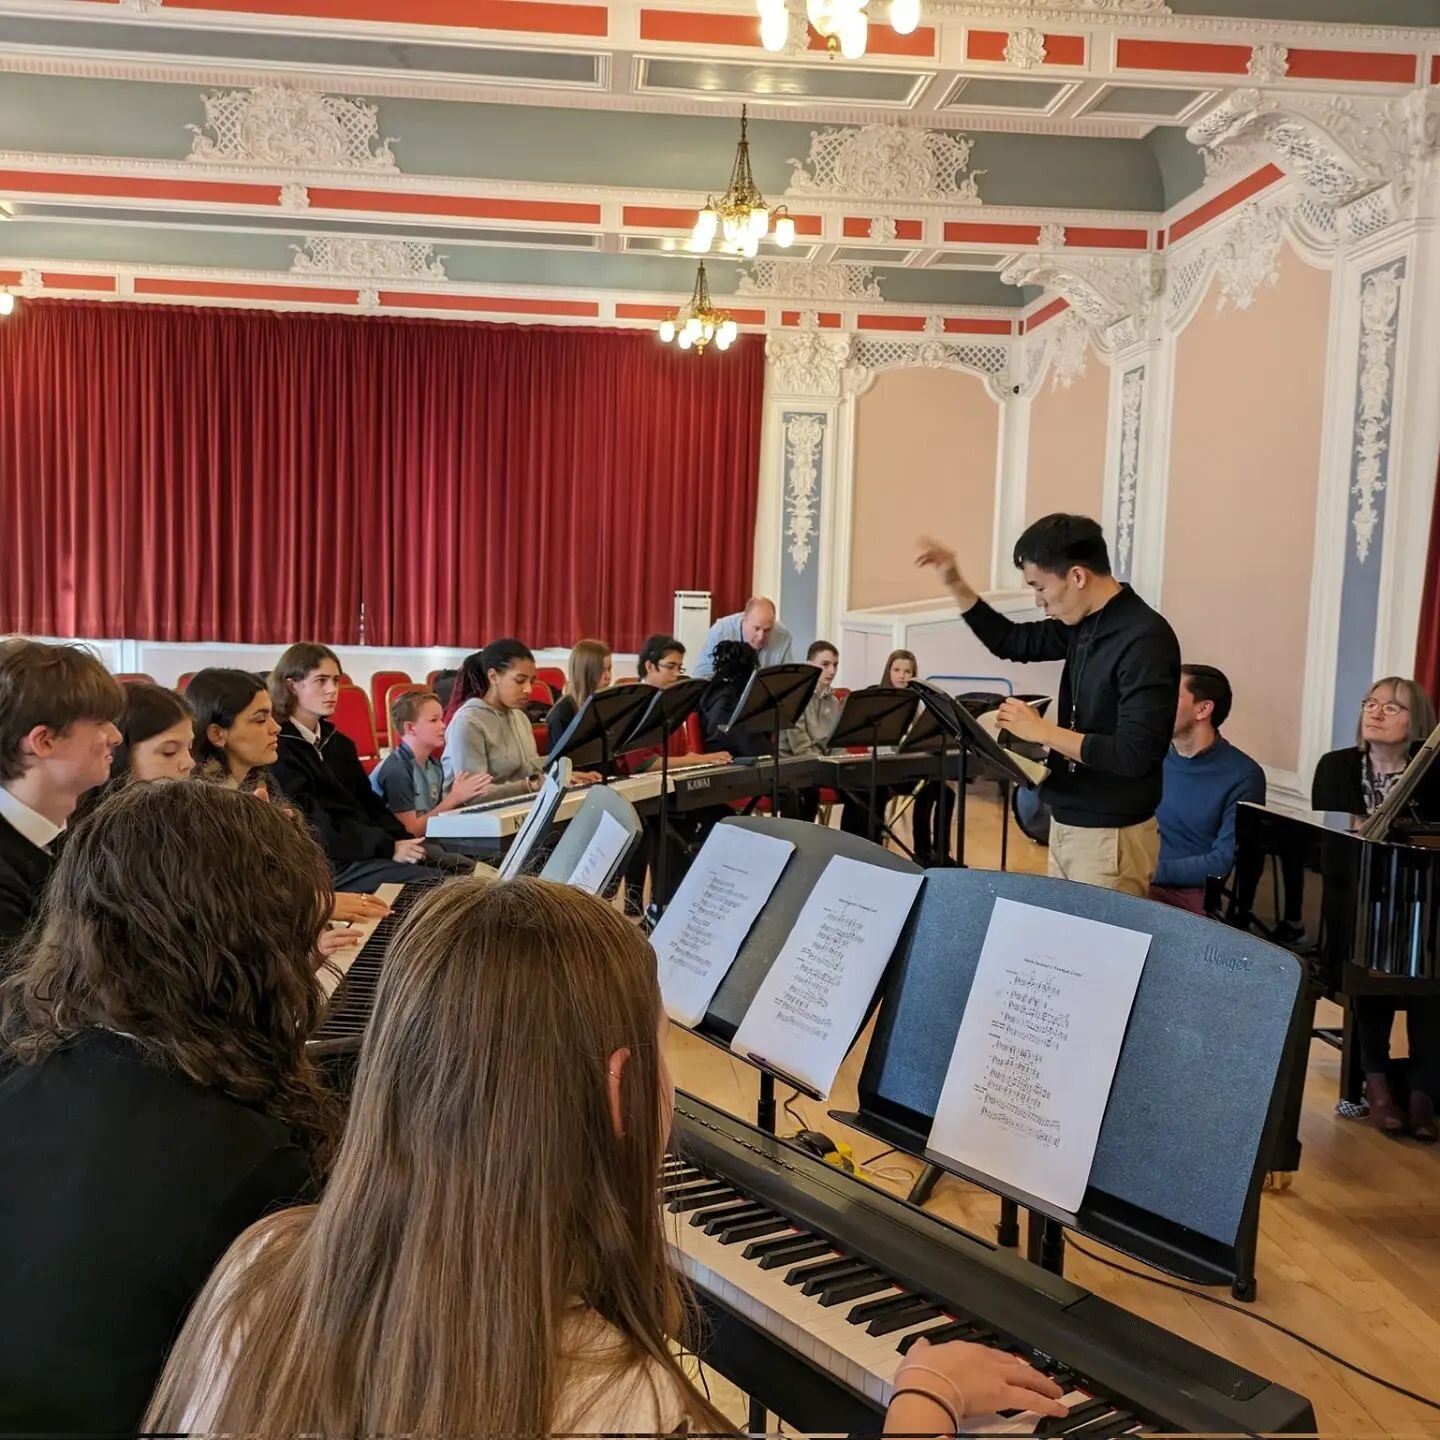 I had the most fulfilling time in Dundee starting with a workshop with Dundee Music Service students on @adam.swayne.piano 's &quot;Football Crazy&quot; for multiple pianos. This was my first time at leading a such workshop and attempt at 'conducting